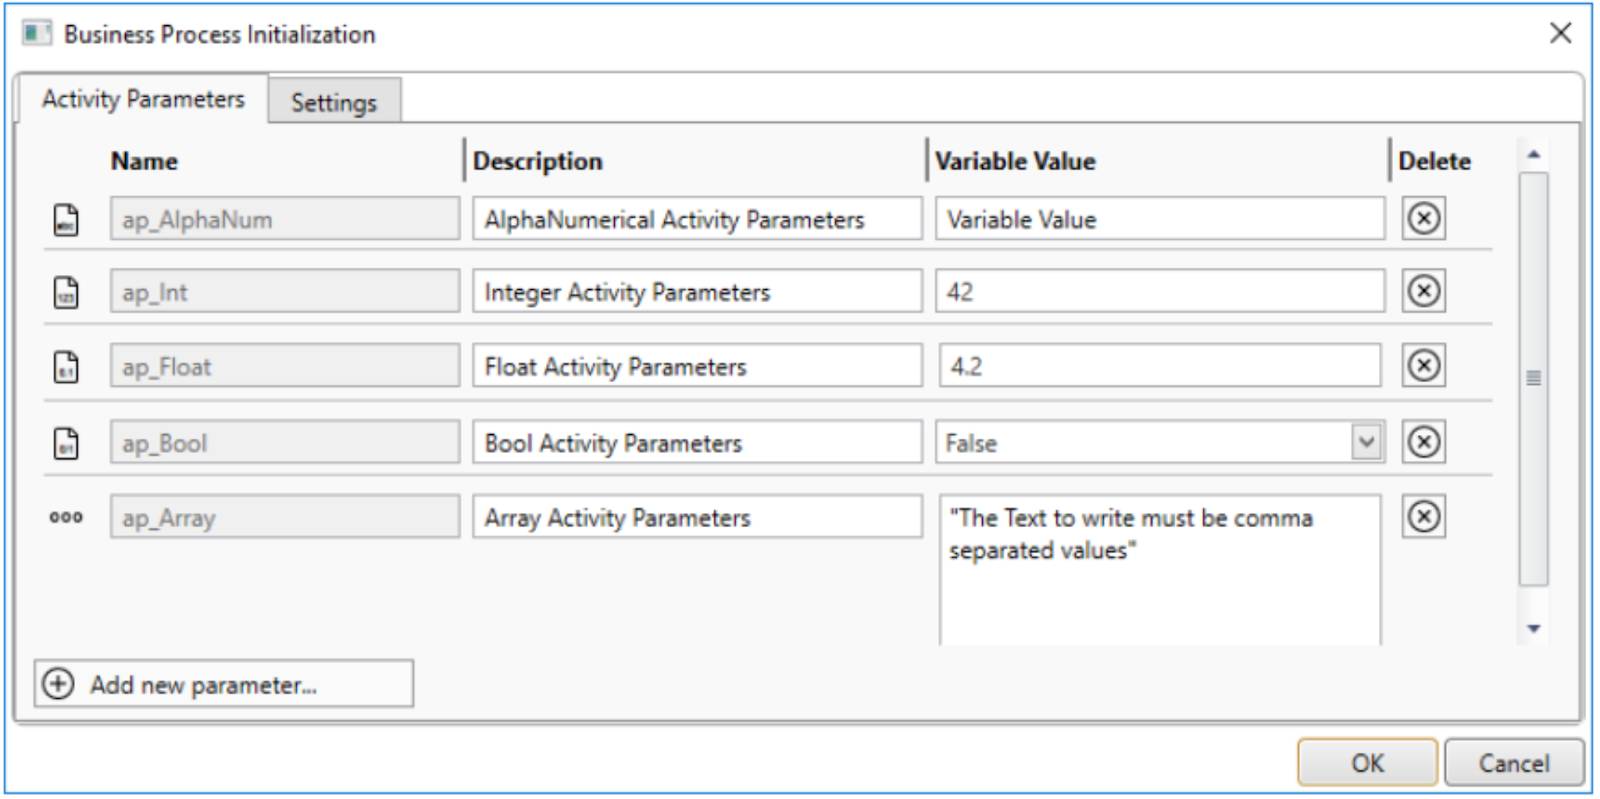 Activity parameter tab showing the Business Process Initialization window.